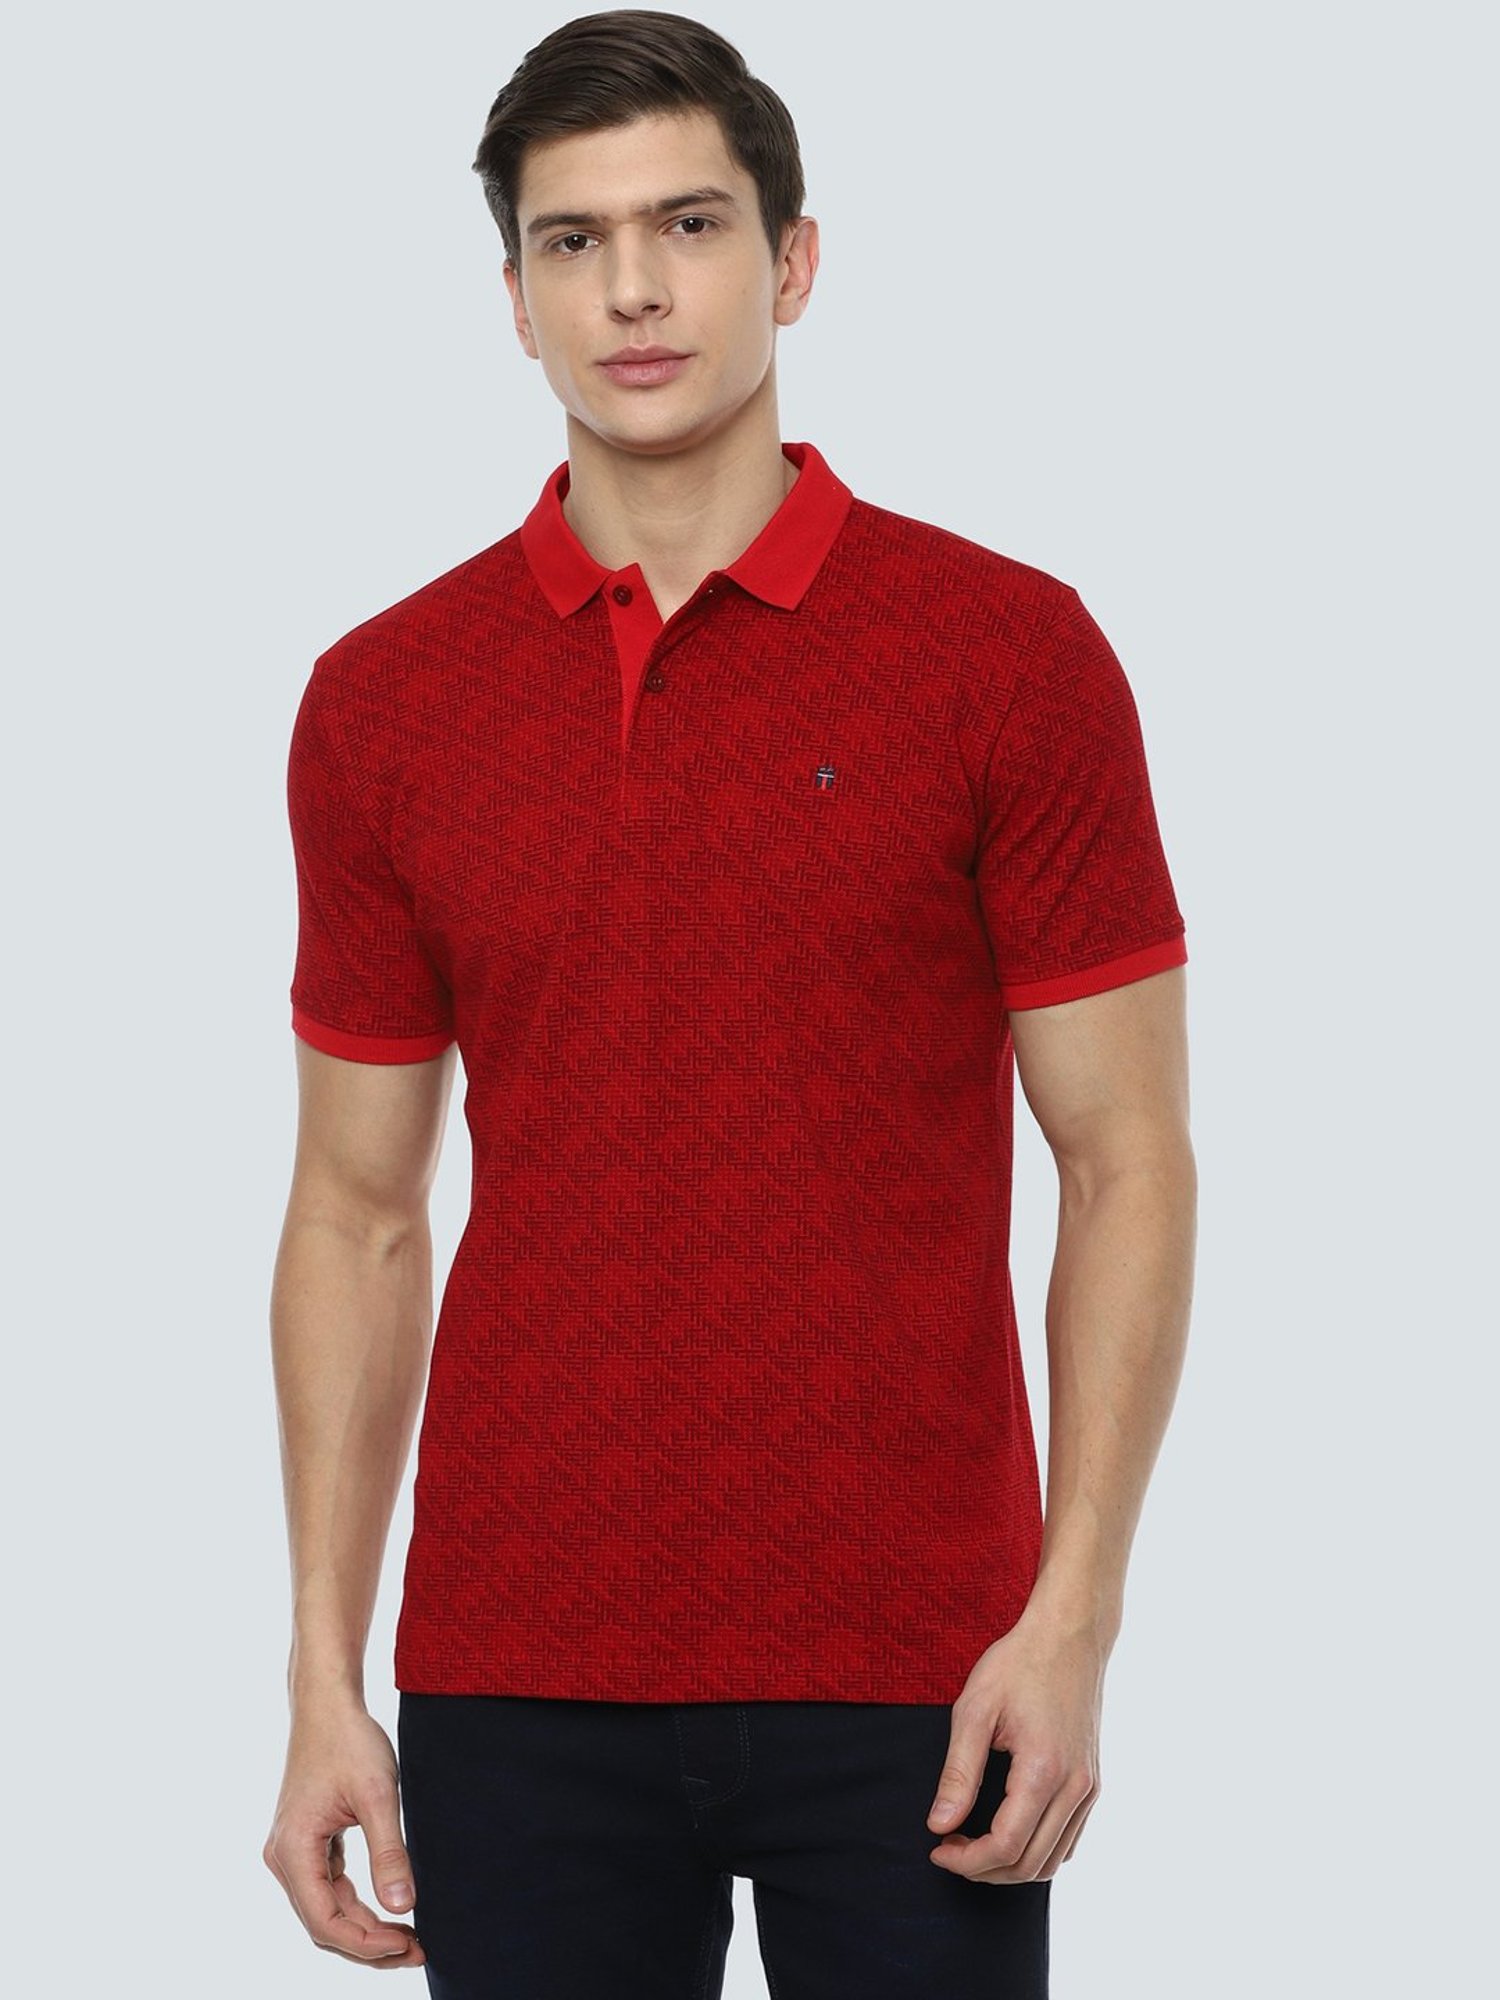 Buy Louis Philippe Maroon T Shirt, l at